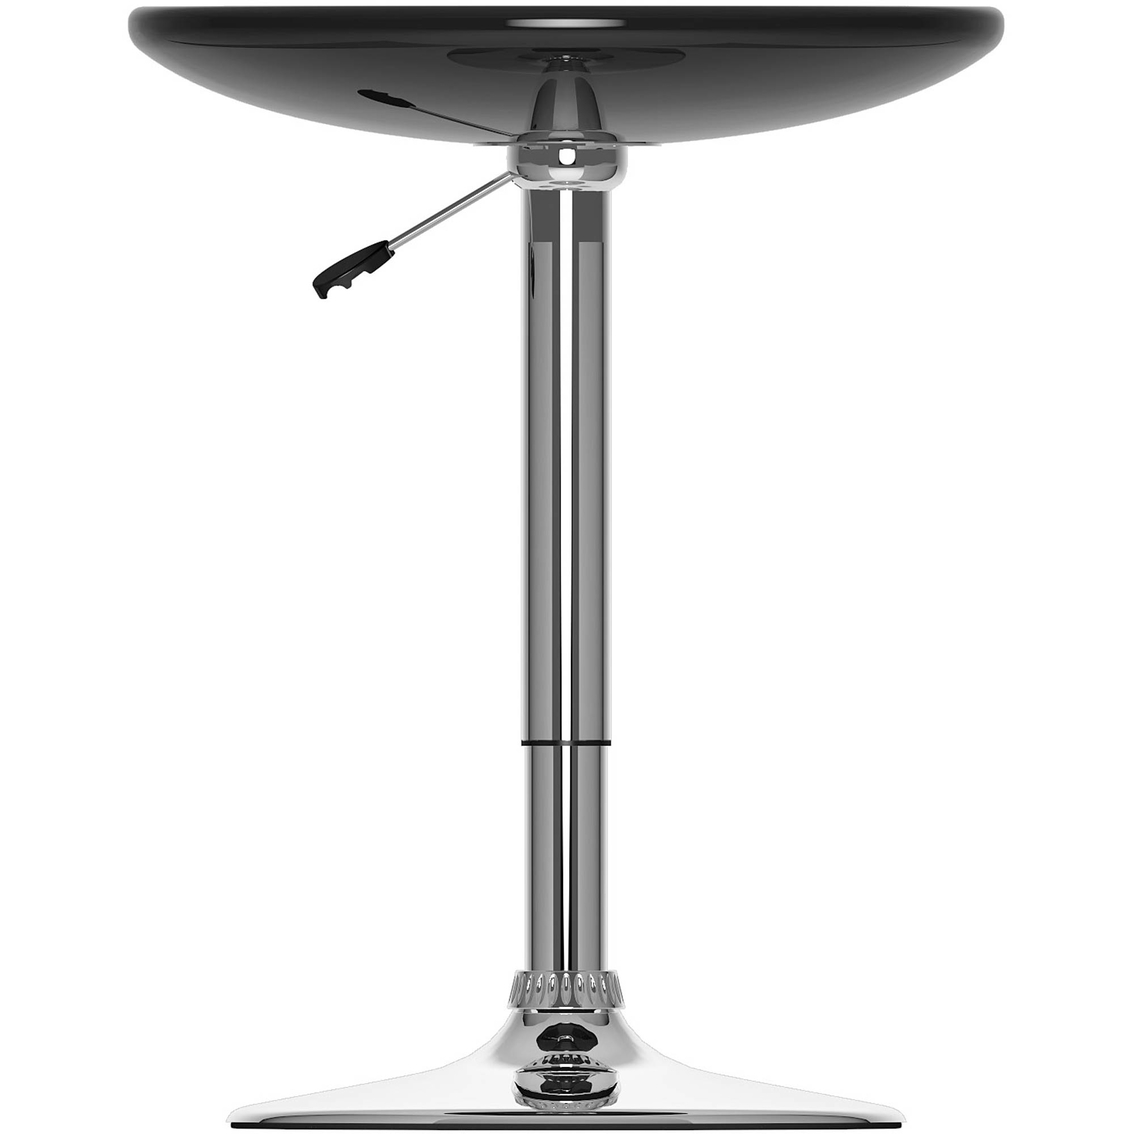 CorLiving DAW-700-T Adjustable Height Round Bar Table in Glossy Black - Image 2 of 4